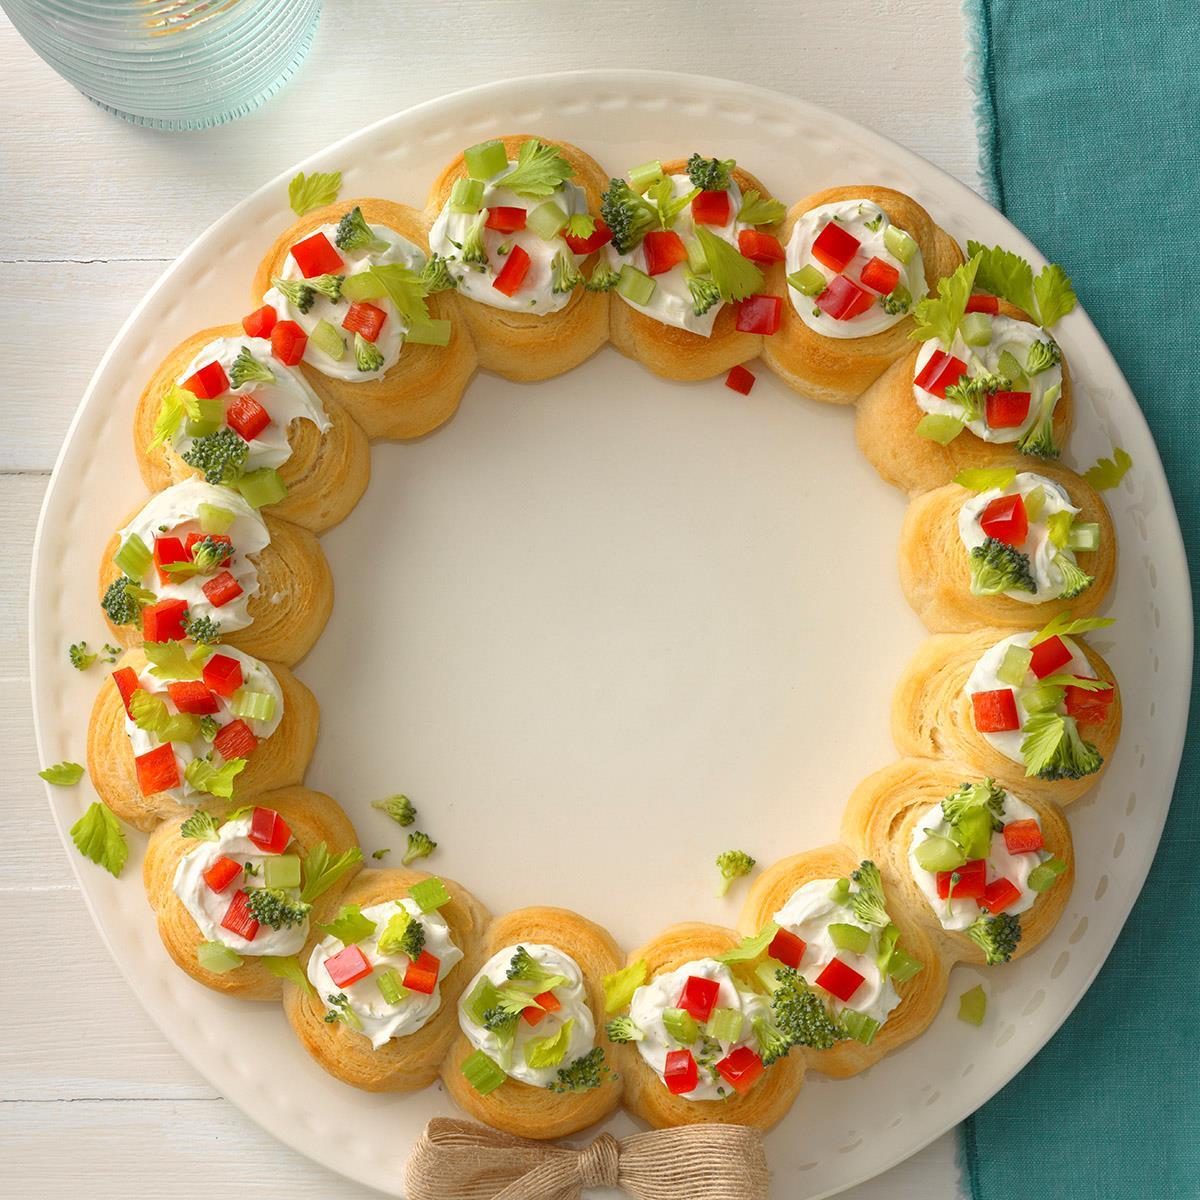 Appetizers & Small Plates: Festive Wreath